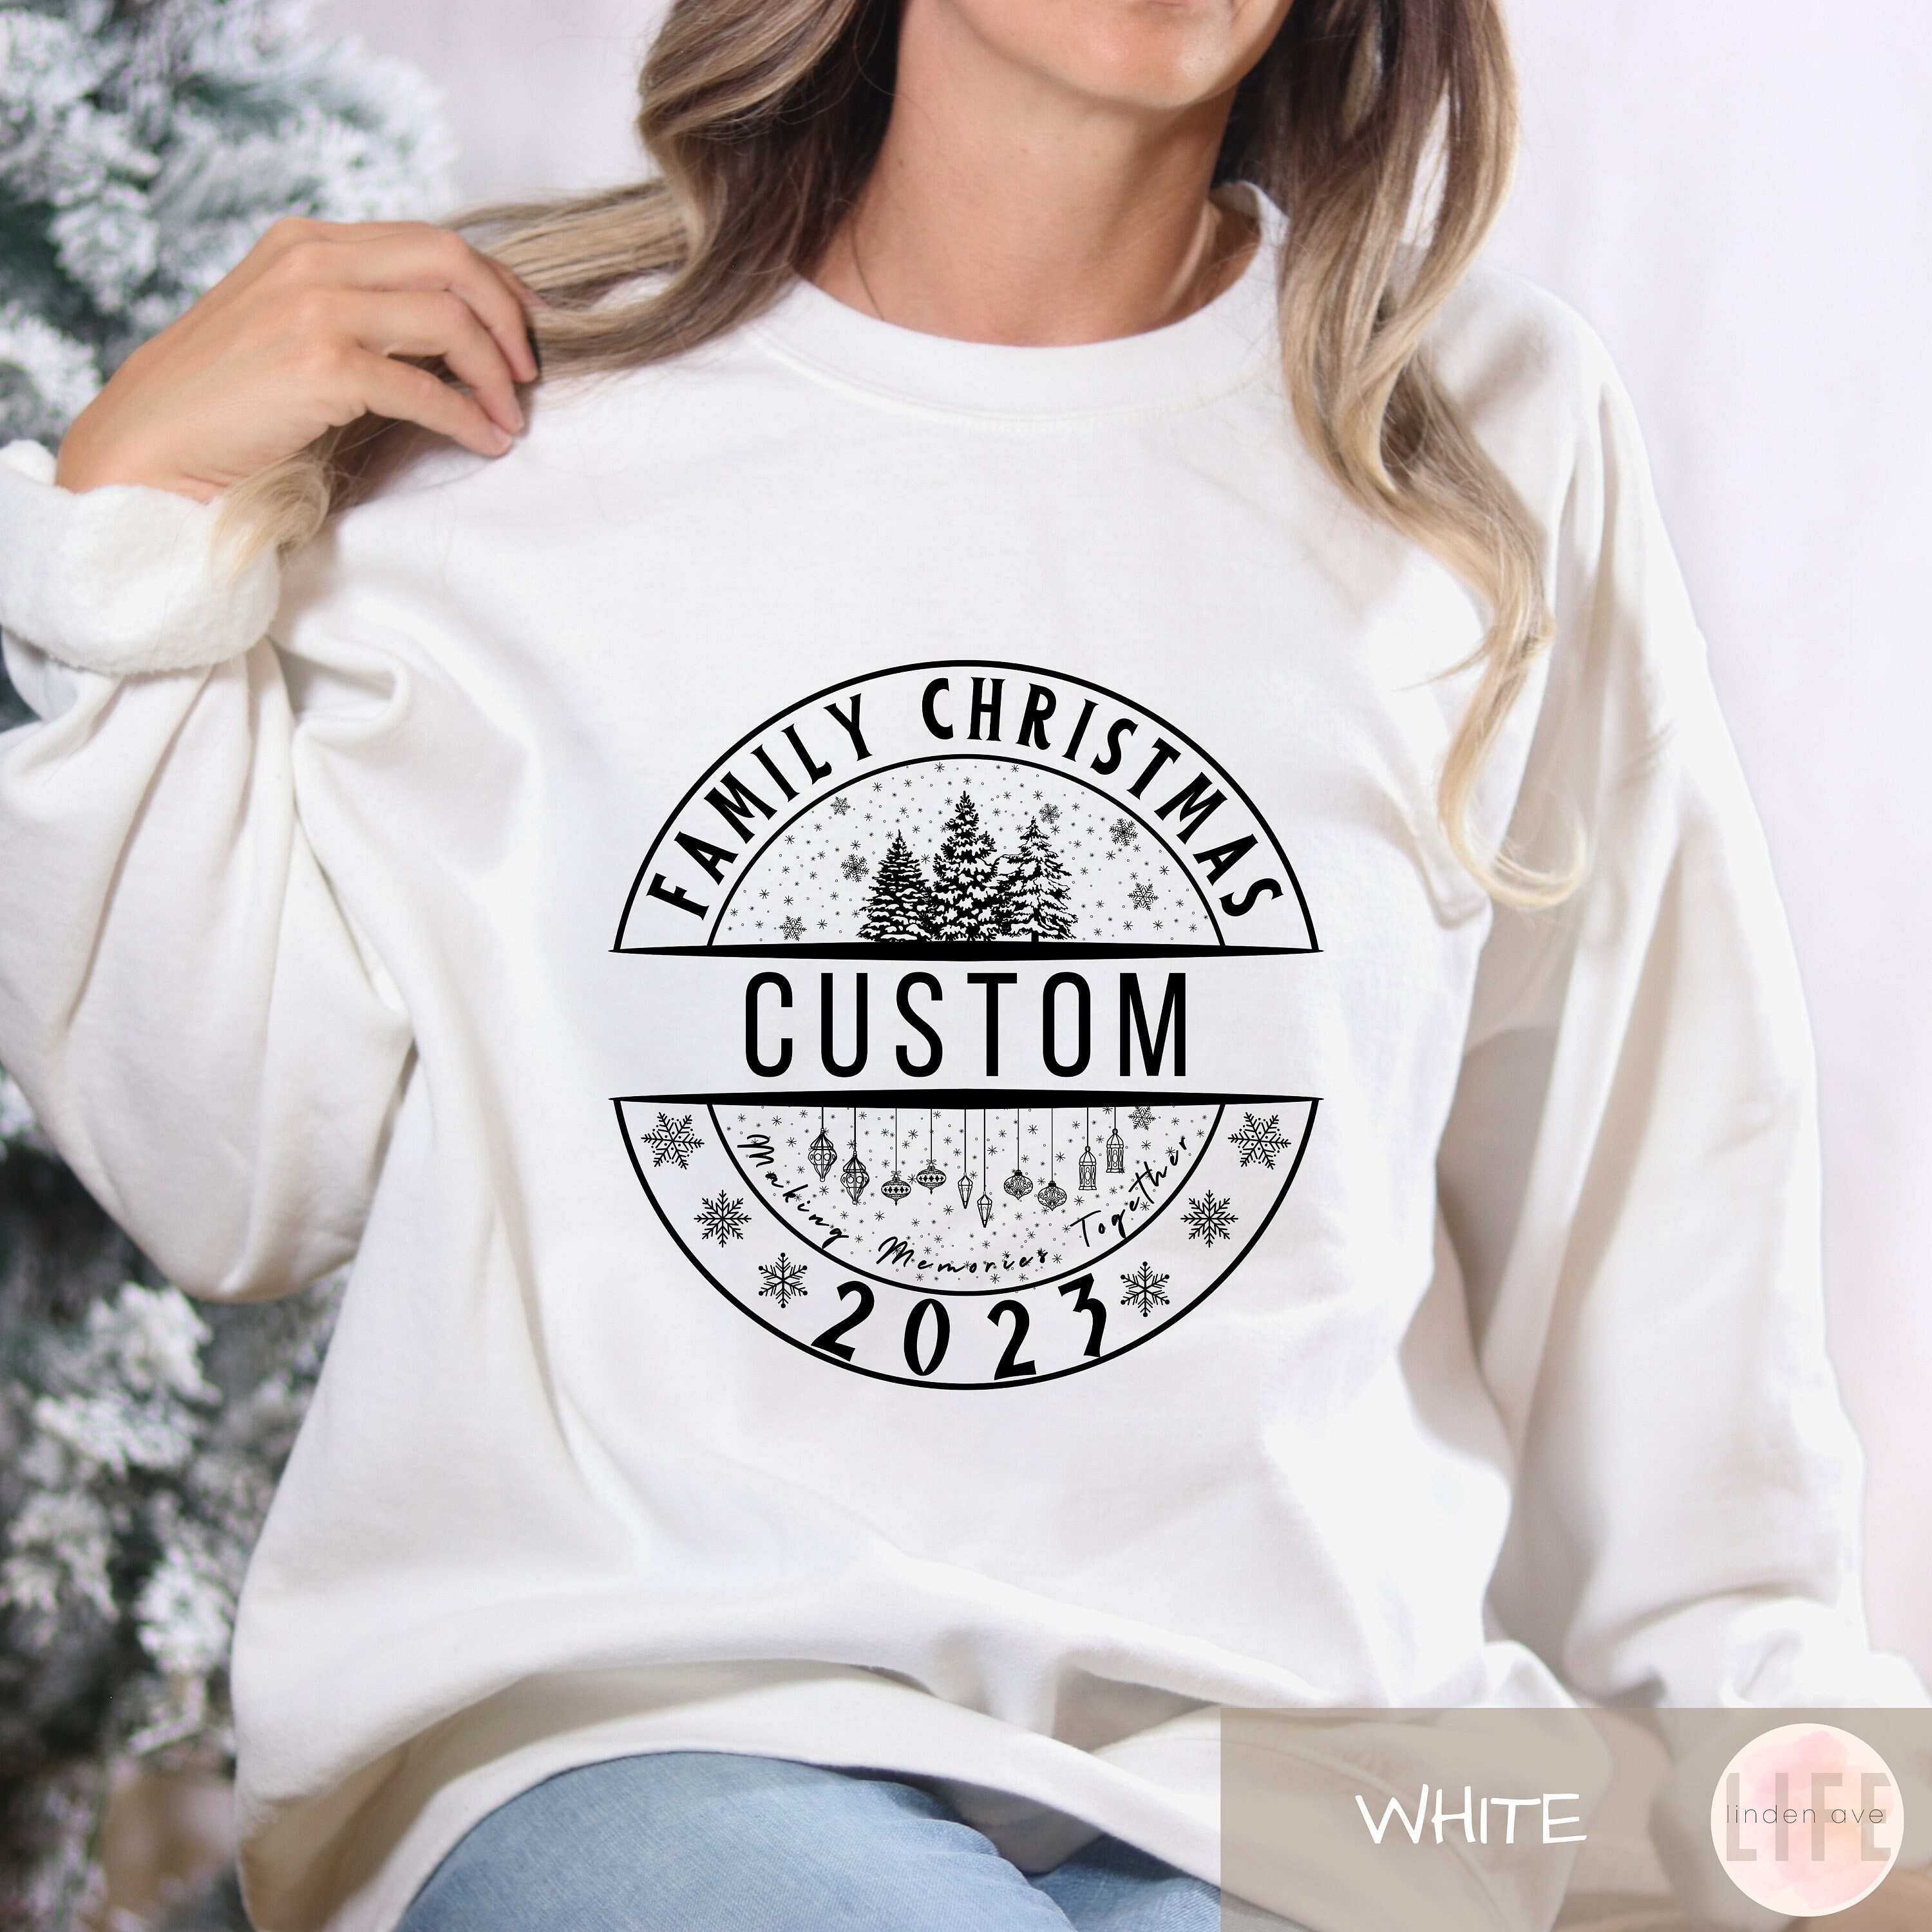 Custom Tampa Bay Lightning Christmas Sweater Inspiring Gift - Personalized  Gifts: Family, Sports, Occasions, Trending